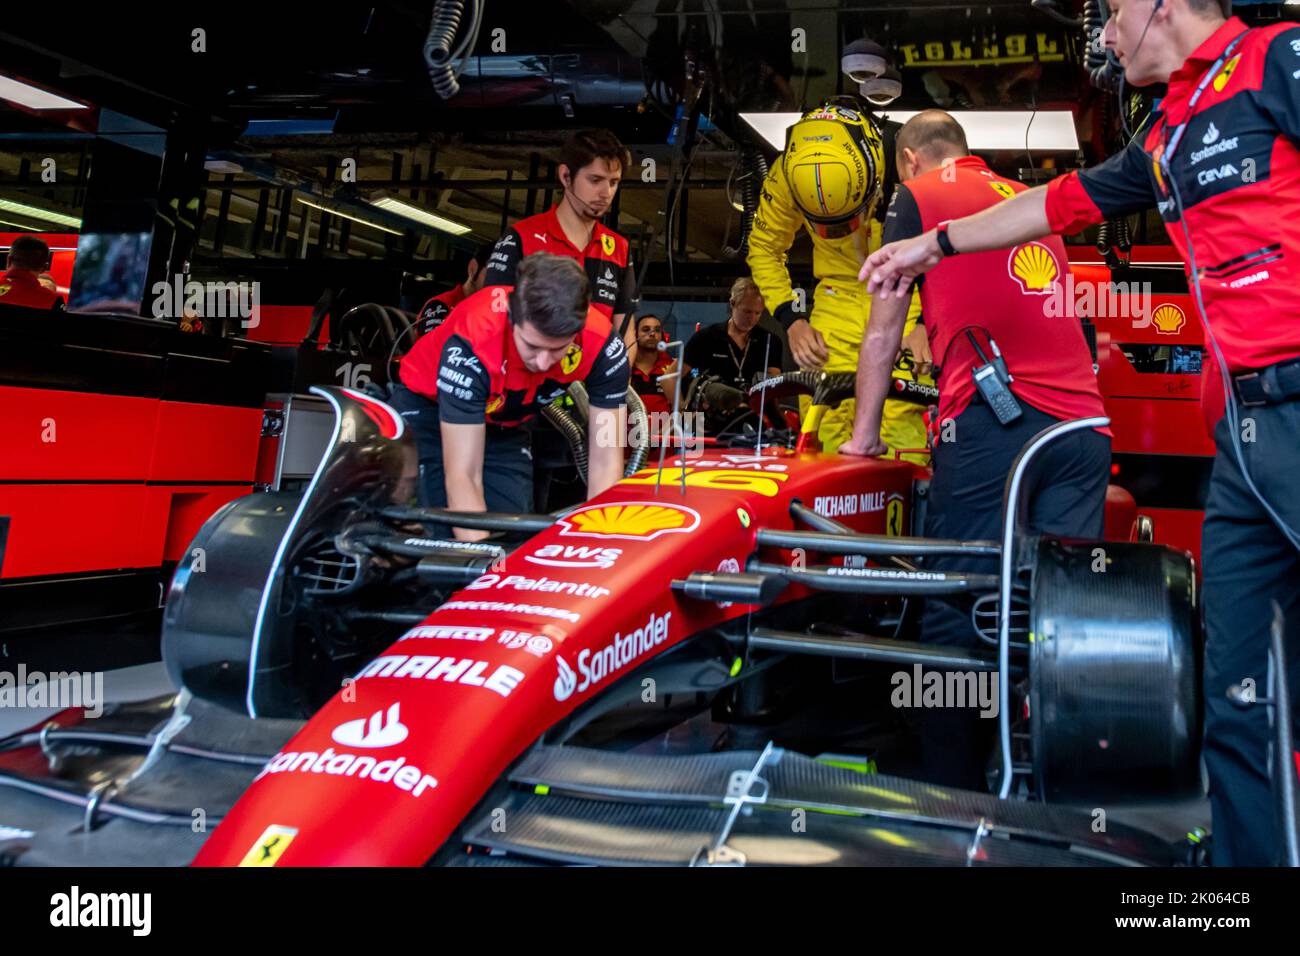 Monza, Italy, 09th Sep 2022, Charles Leclerc, from Monaco competes for Scuderia Ferrari